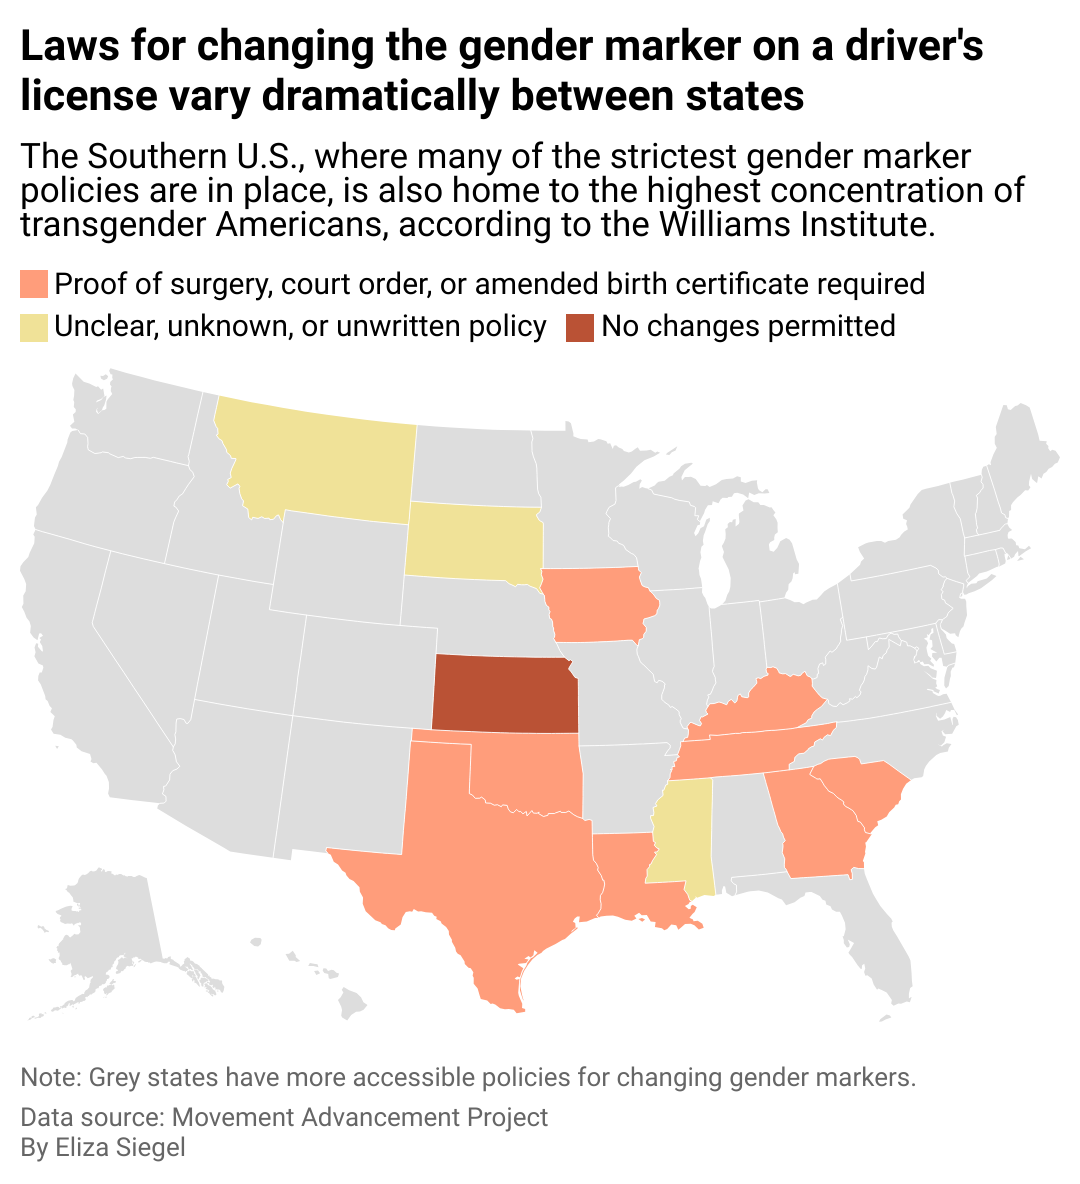 This map of the U.S. shows the varying laws for changing the gender marker on a driver